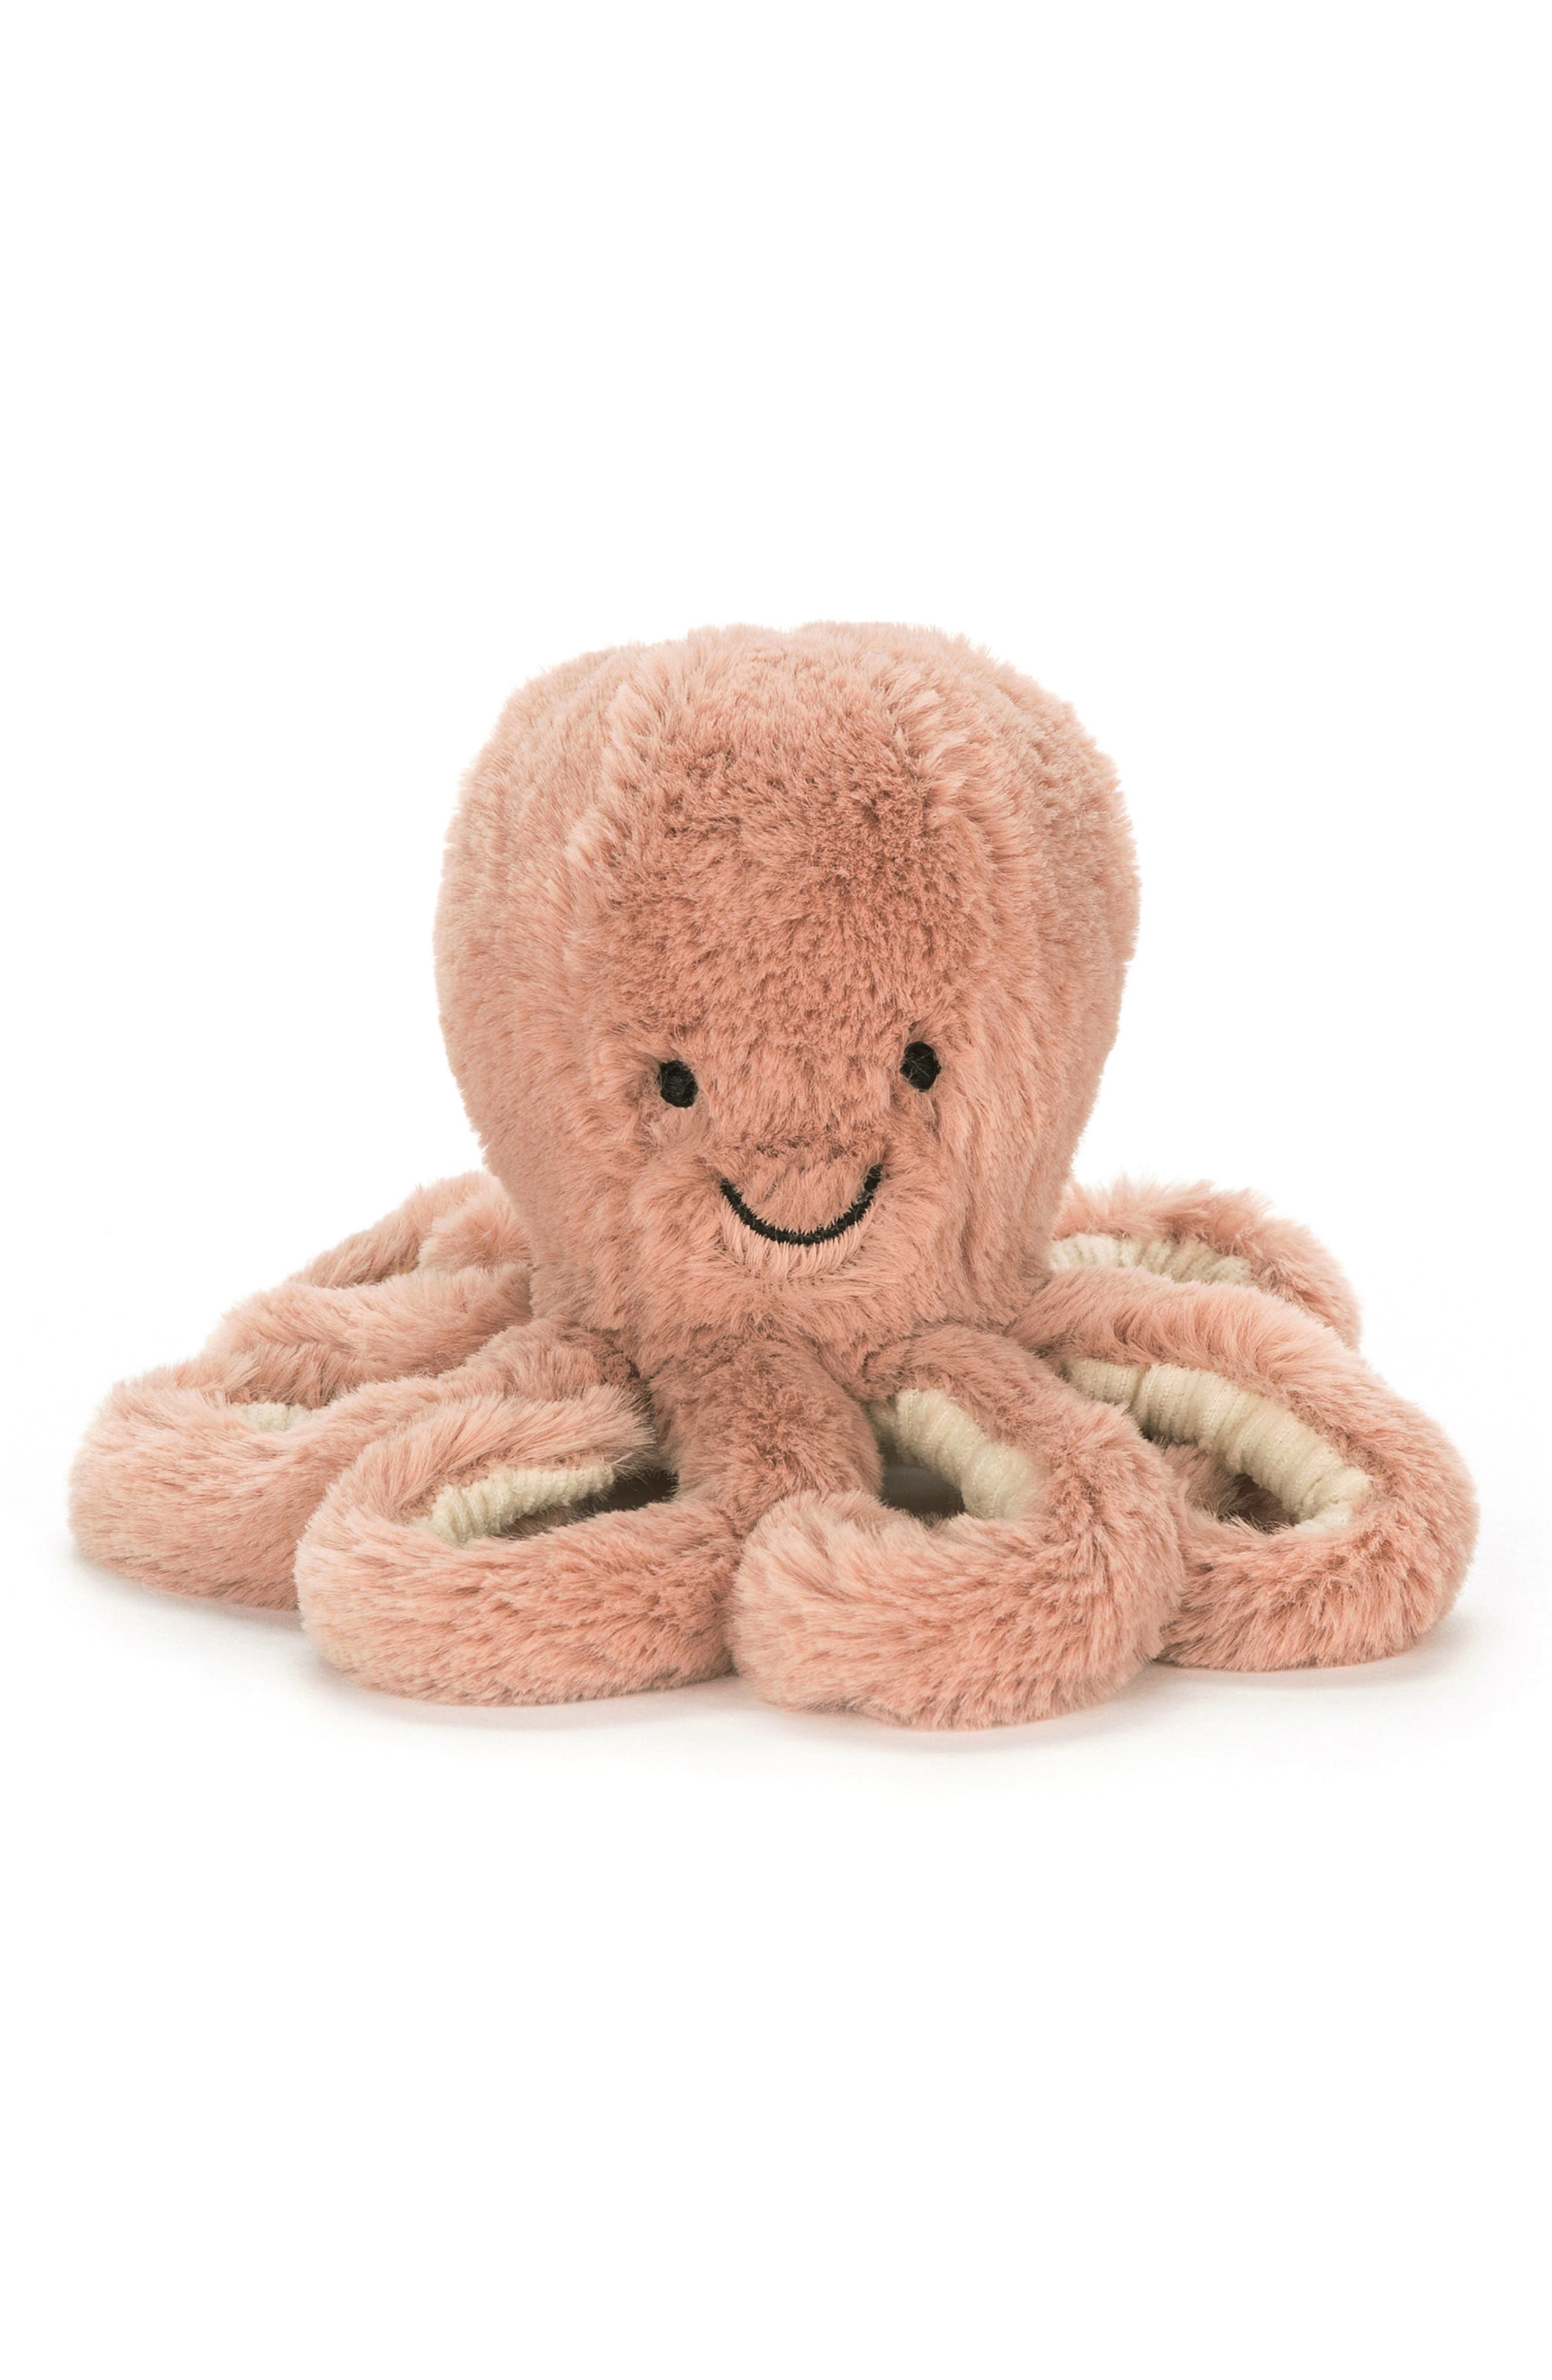 Toddler Jellycat Baby Odell Octopus Stuffed Animal